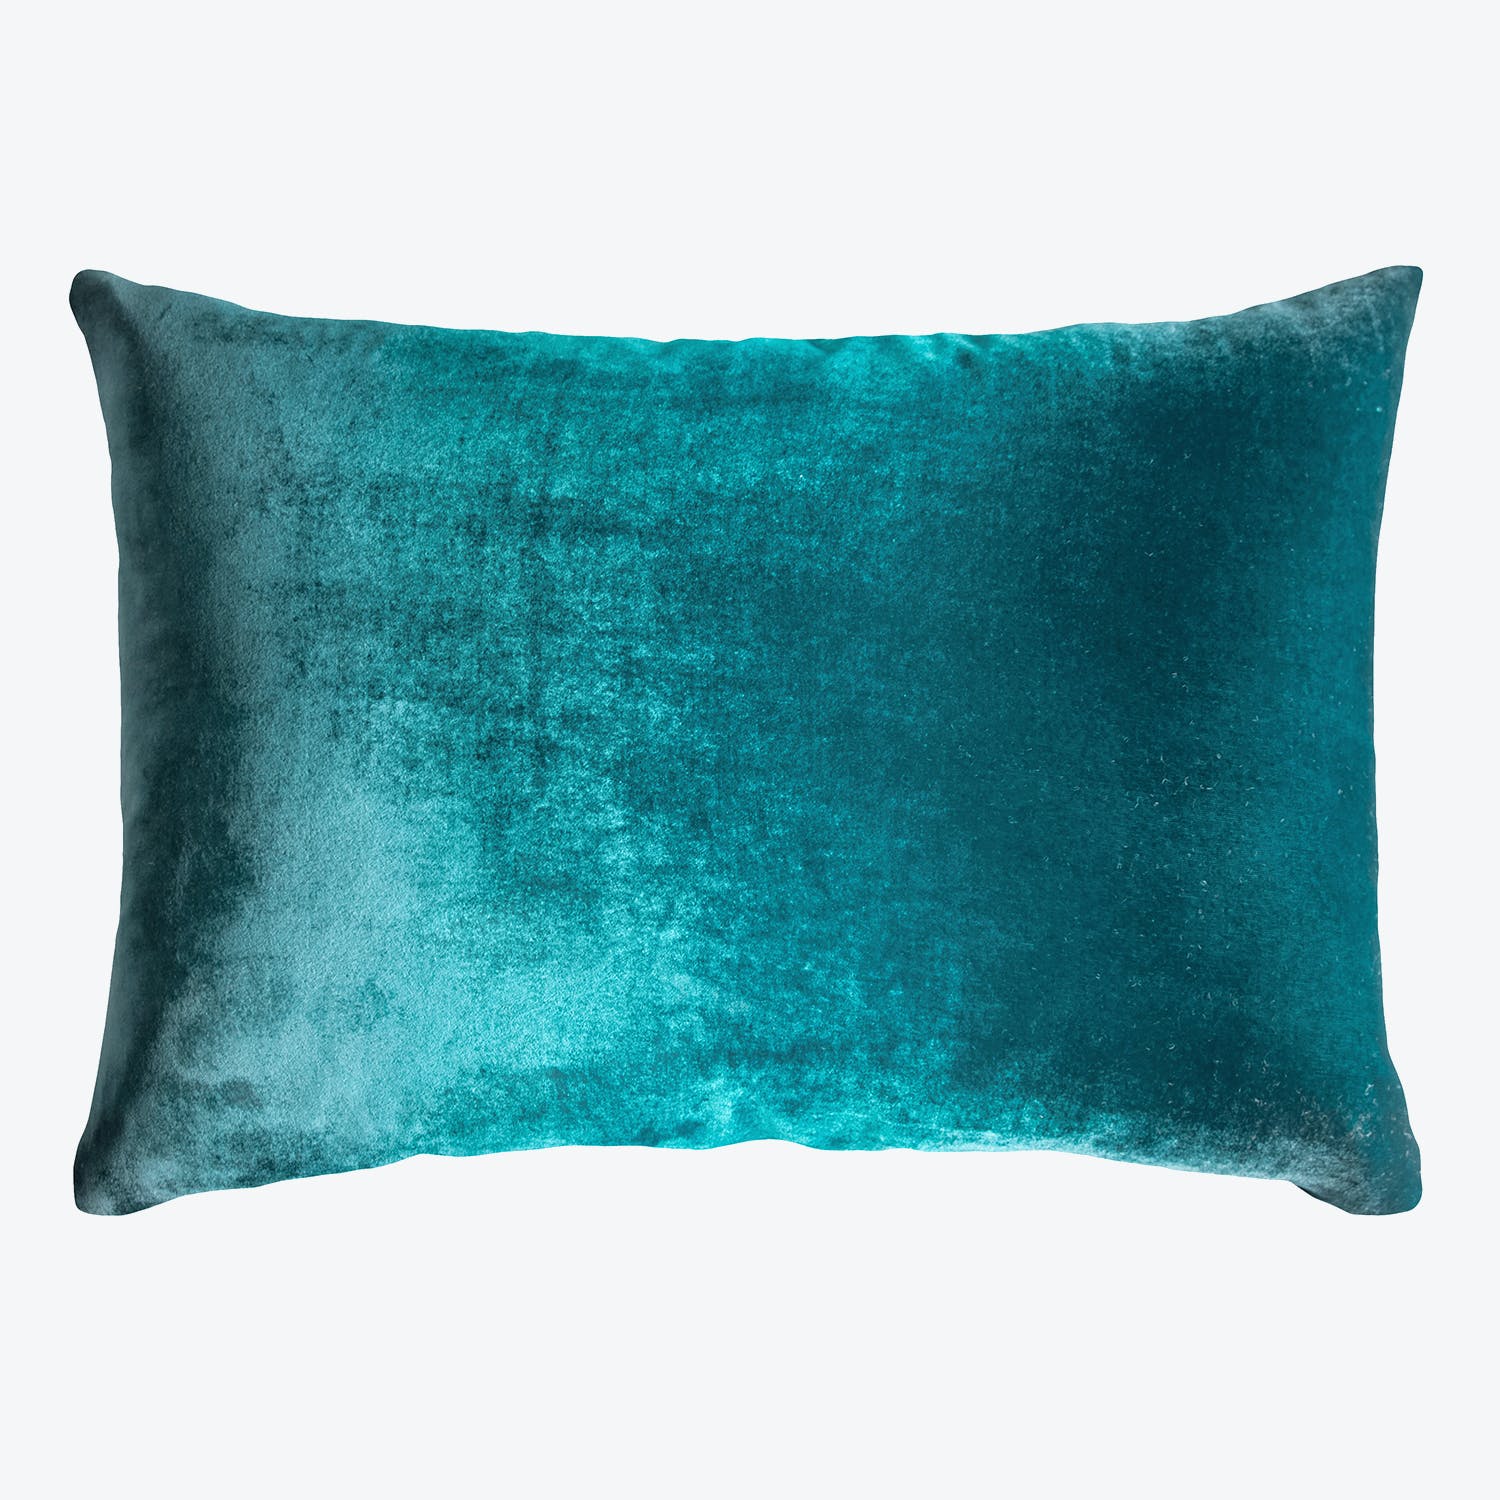 Vibrant teal plush pillow with gradient texture adds decorative touch.